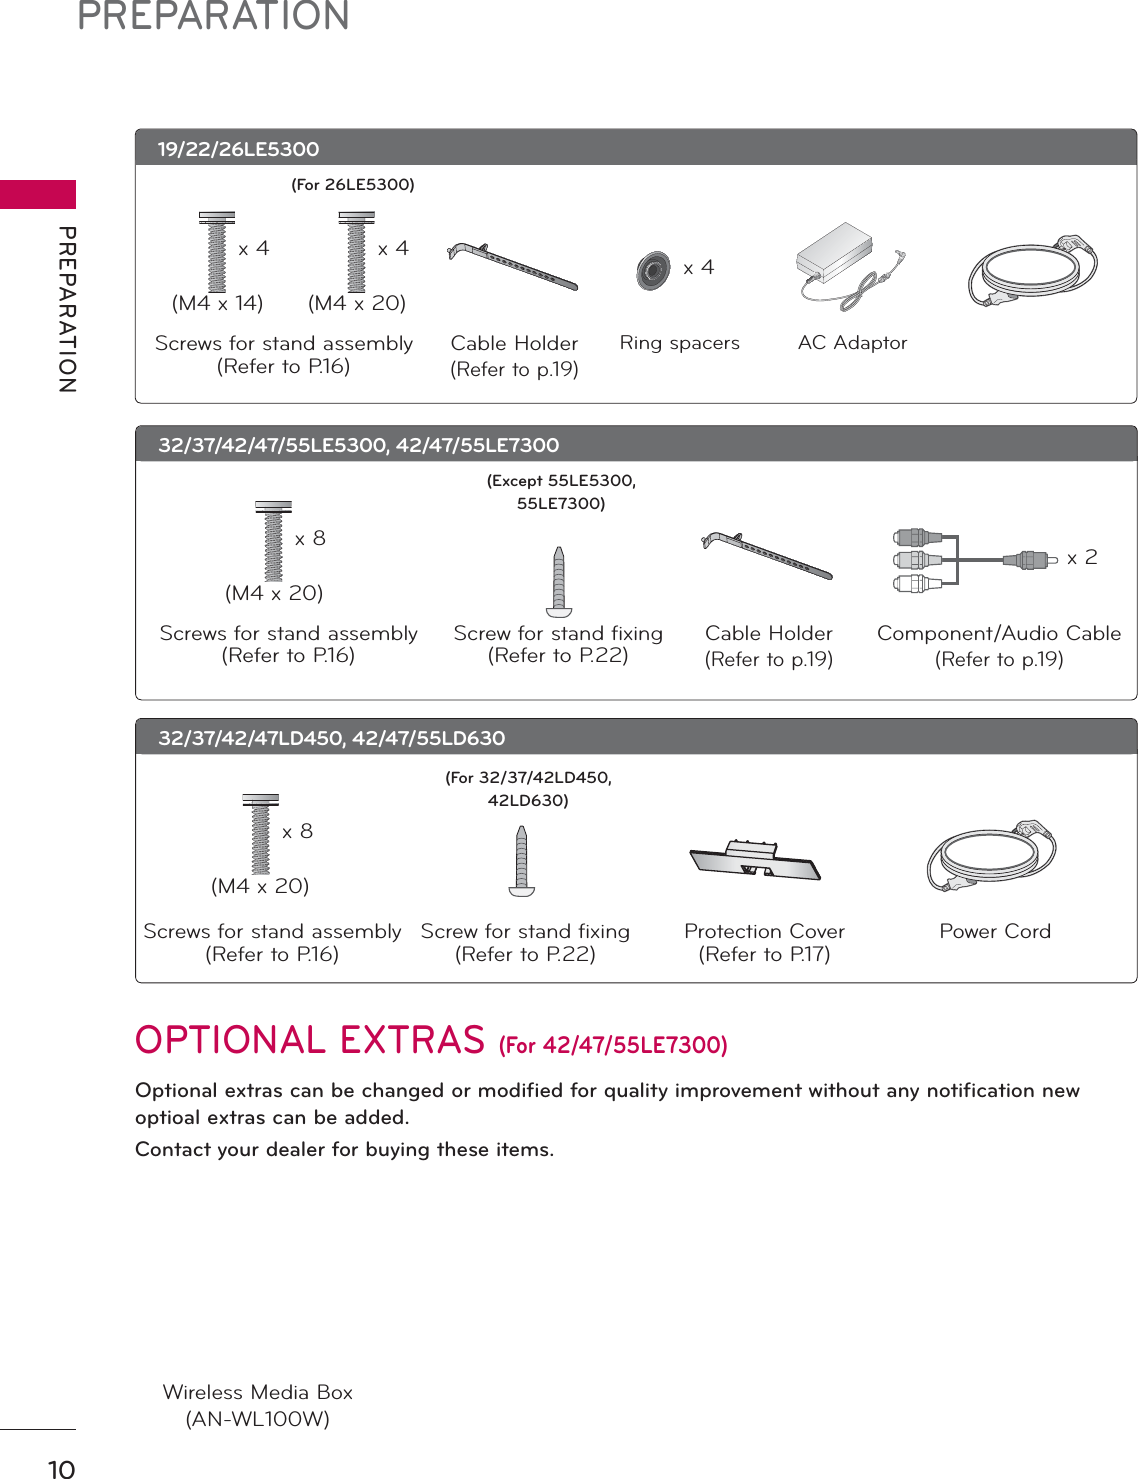 PREPARATIONPREPARATION10OPTIONAL EXTRAS (For 42/47/55LE7300)Optional extras can be changed or modified for quality improvement without any notification new optioal extras can be added.Contact your dealer for buying these items.19/22/26LE5300Cable Holder(Refer to p.19)Wireless Media Box(AN-WL100W)Screws for stand assembly(Refer to P.16)x 4 x 4(M4 x 14) (M4 x 20)AC AdaptorRing spacers(For 26LE5300)32/37/42/47LD450, 42/47/55LD630(M4 x 20)Screws for stand assembly(Refer to P.16)Screw for stand fixing(Refer to P.22)x 8Protection Cover(Refer to P.17)(For 32/37/42LD450, 42LD630)x 432/37/42/47/55LE5300, 42/47/55LE7300Cable Holder(Refer to p.19)Component/Audio Cable(Refer to p.19)Screws for stand assembly(Refer to P.16)x 8 x 2(M4 x 20)Screw for stand fixing(Refer to P.22)Power Cord(Except 55LE5300, 55LE7300)